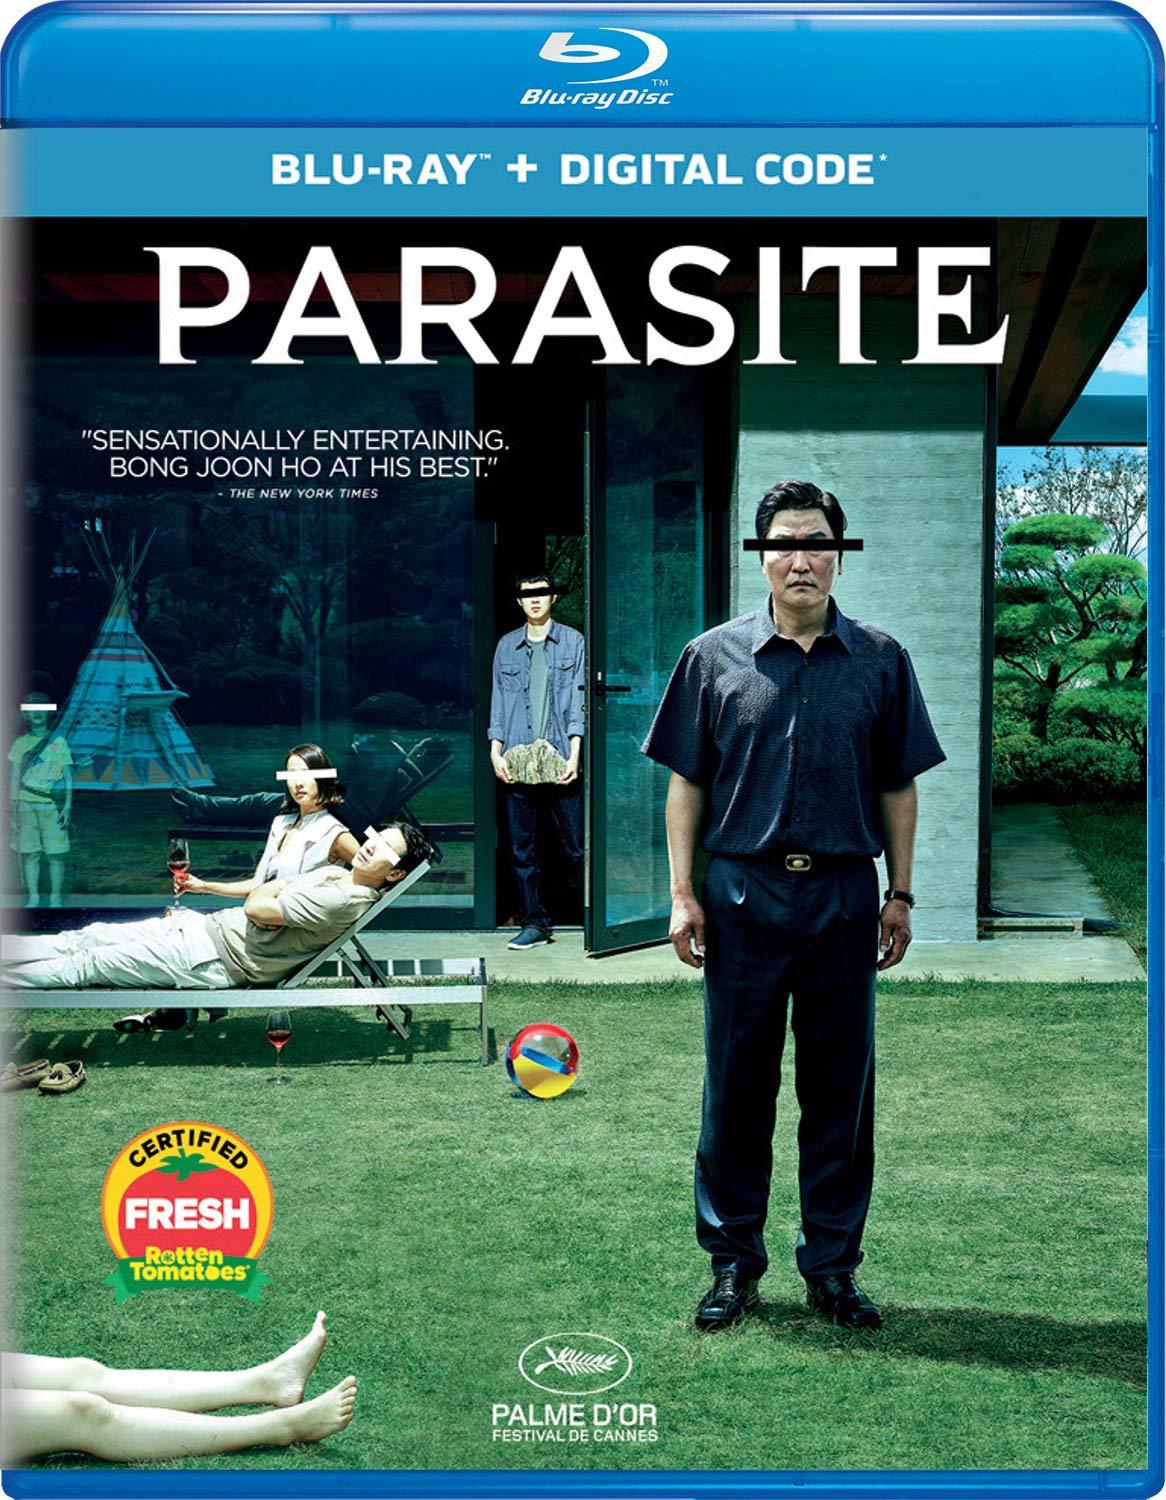 Parasite, now available to own on Blu-ray and Digital